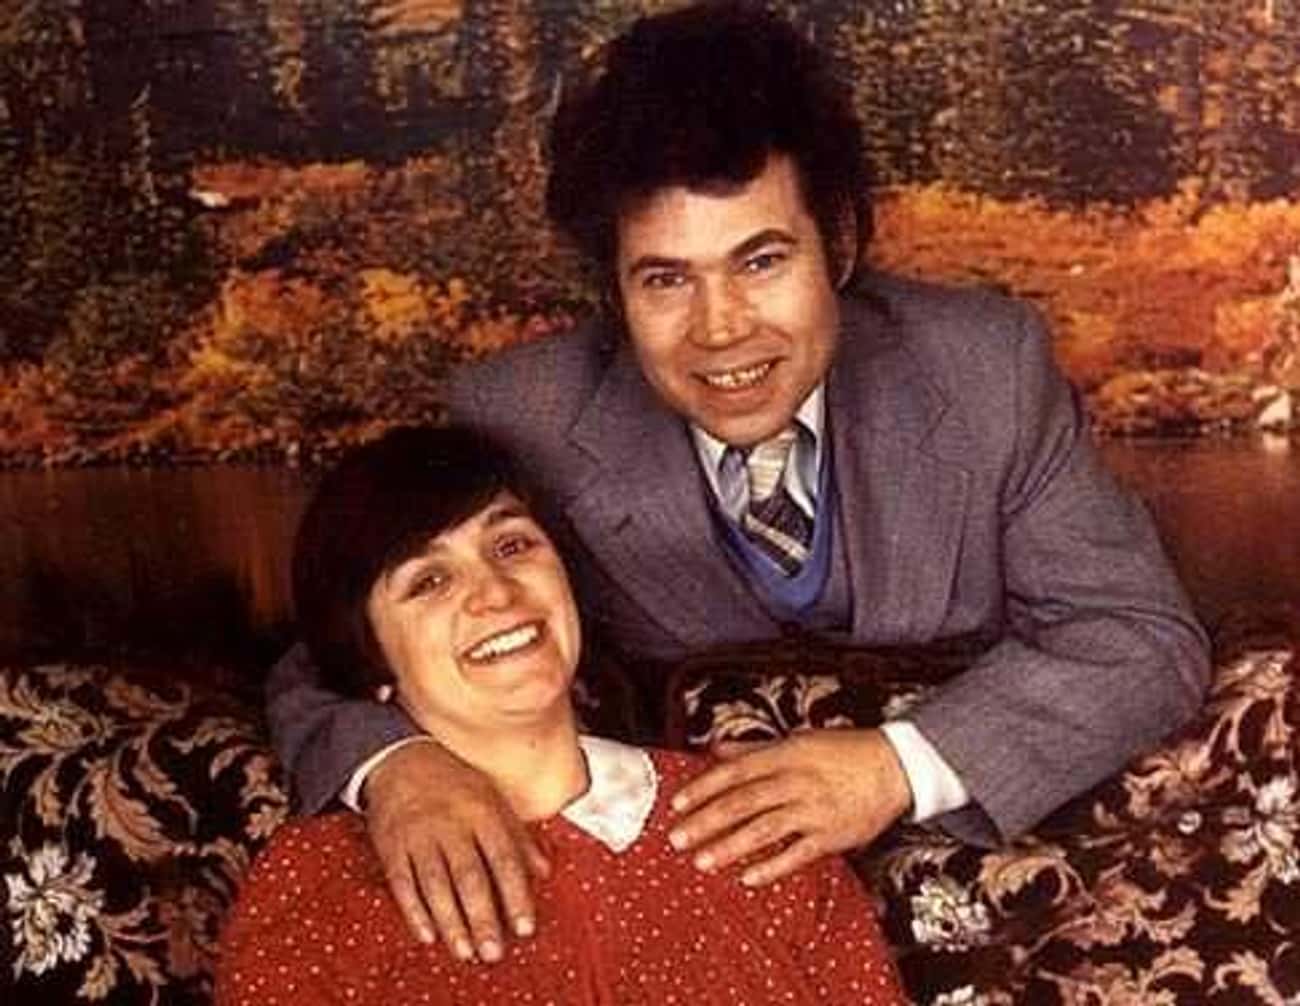 Rosemary Worked As A Prostitute While Fred Was Her Pimp